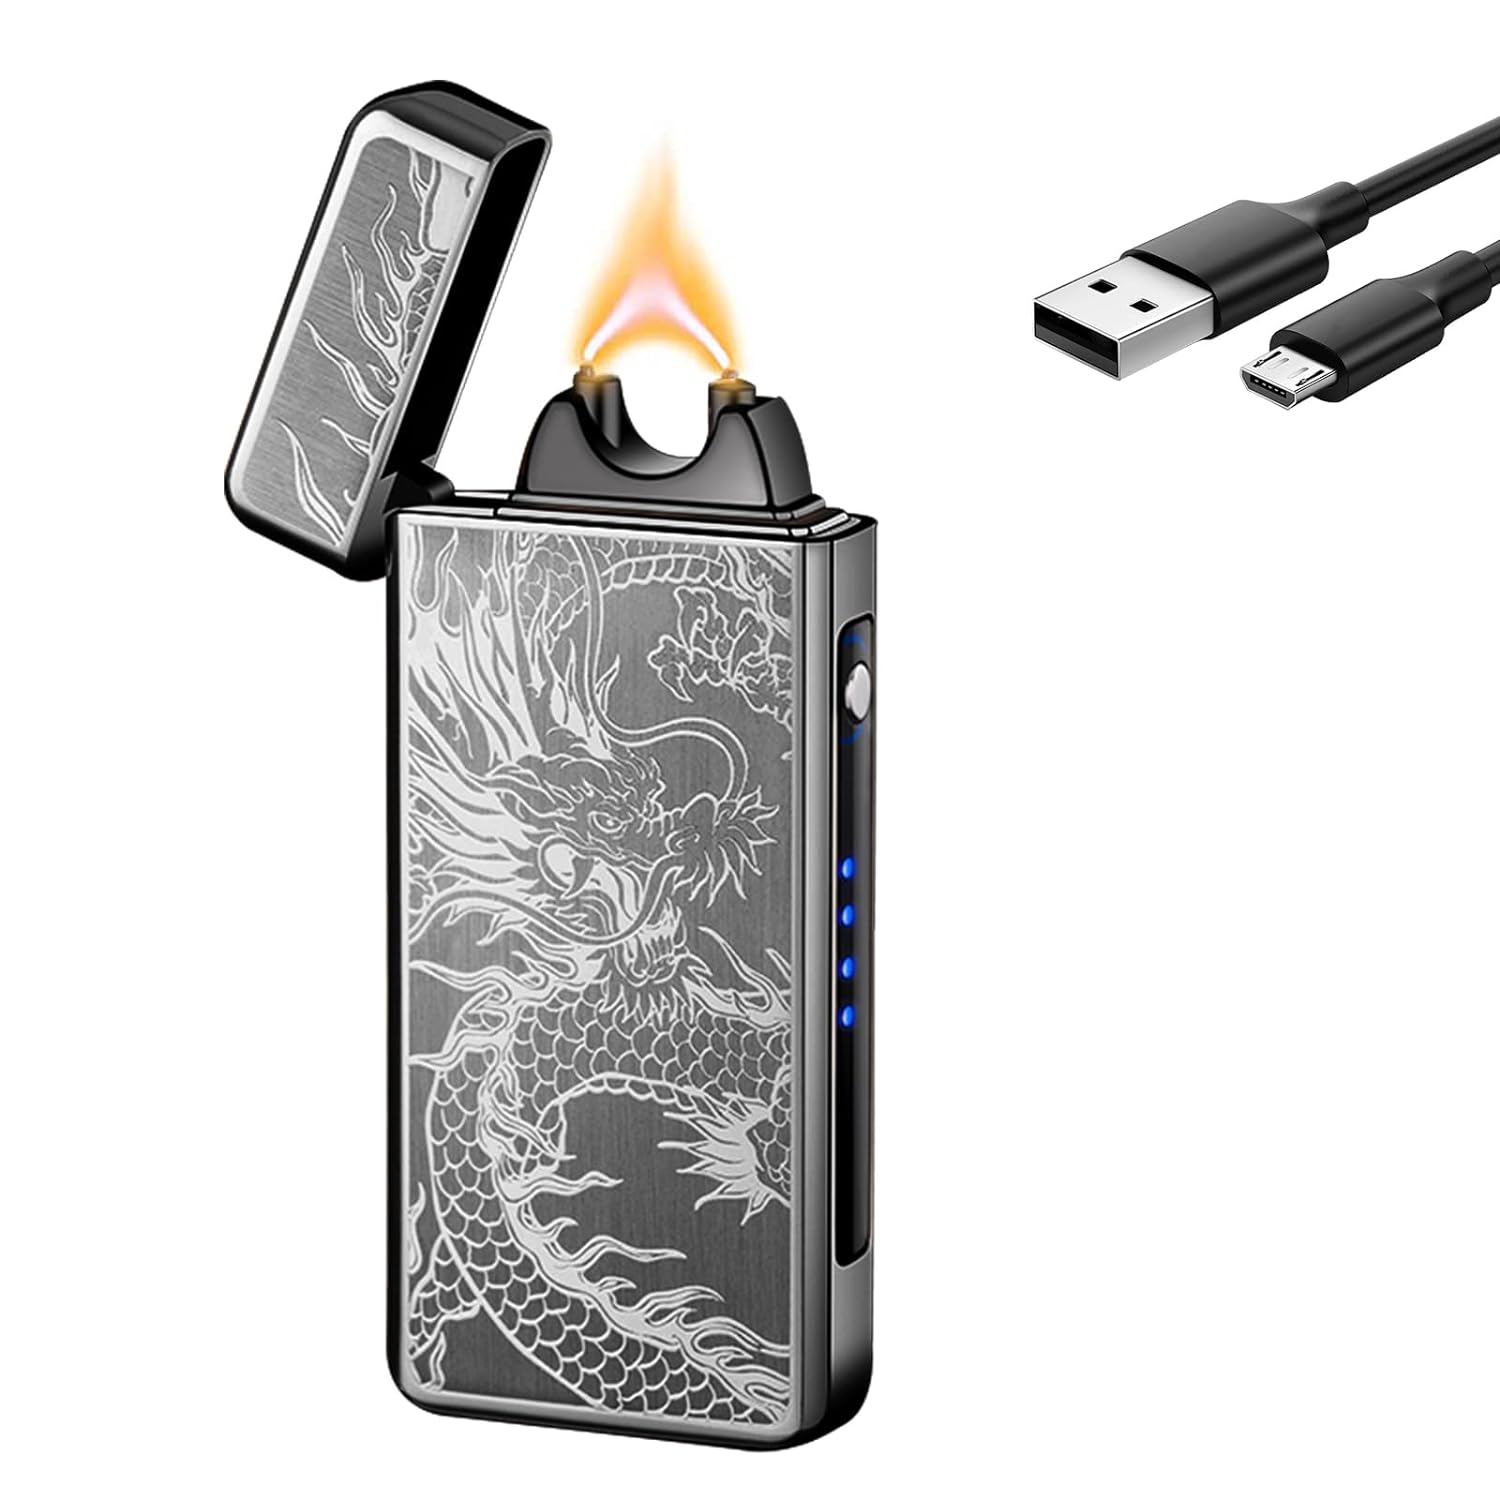 YOZWOO Electric Lighter Rechargeable, Arc Lighter, USB Lighter with Overheat Protection, Windproof Electronic Lighter for Candle, Outdoor Camping, Cool Lighter with Gift Box(Black Dragon)